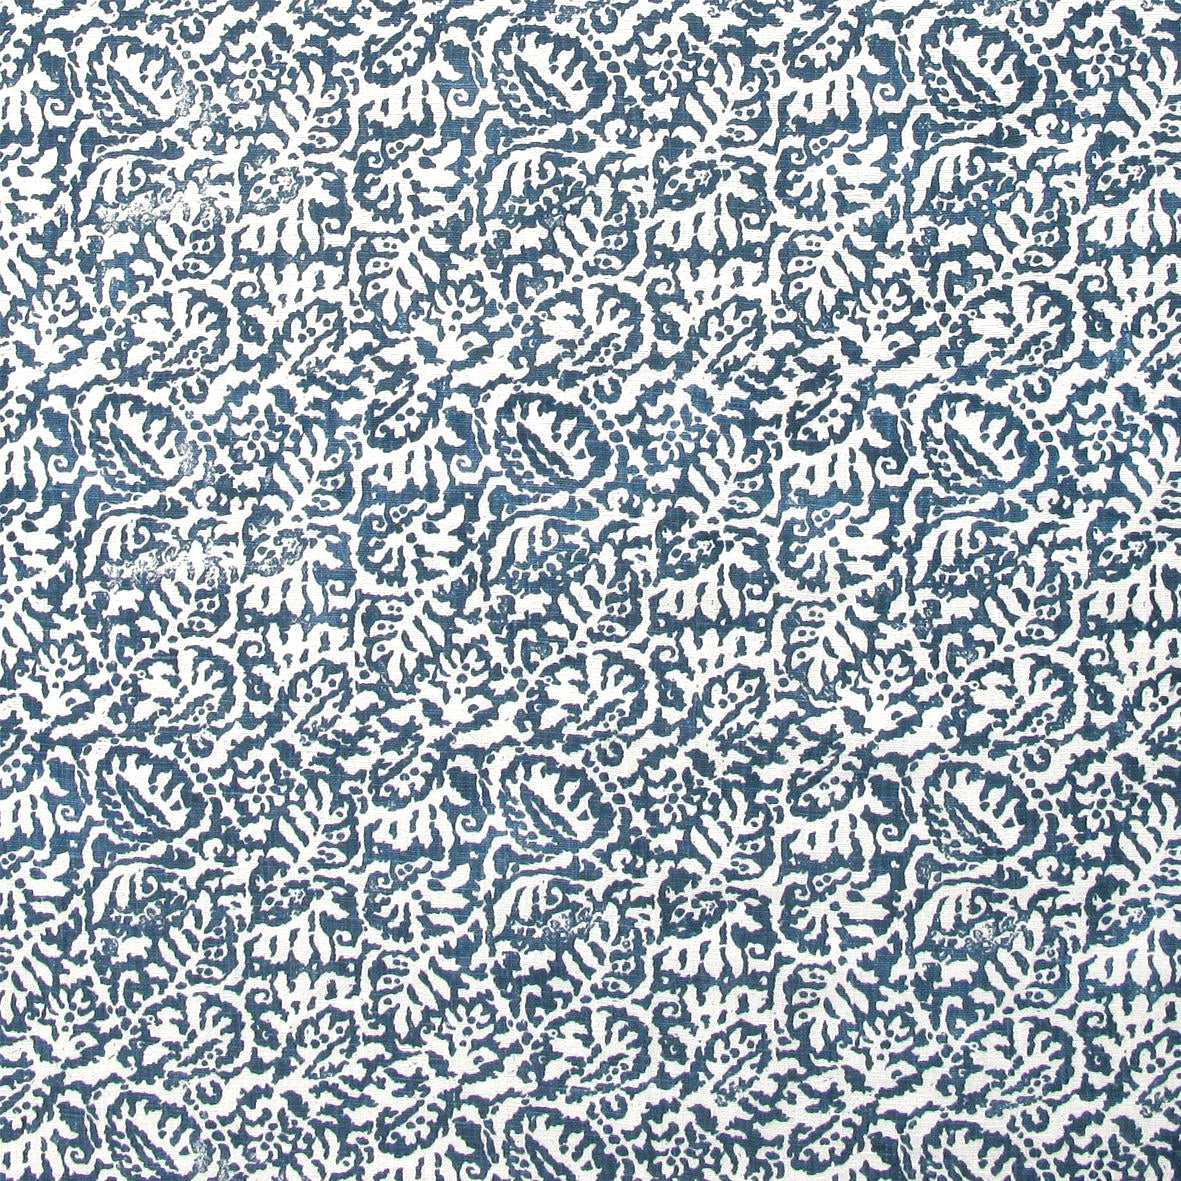 Detail of fabric in a dense paisley print in white on a mottled navy field.